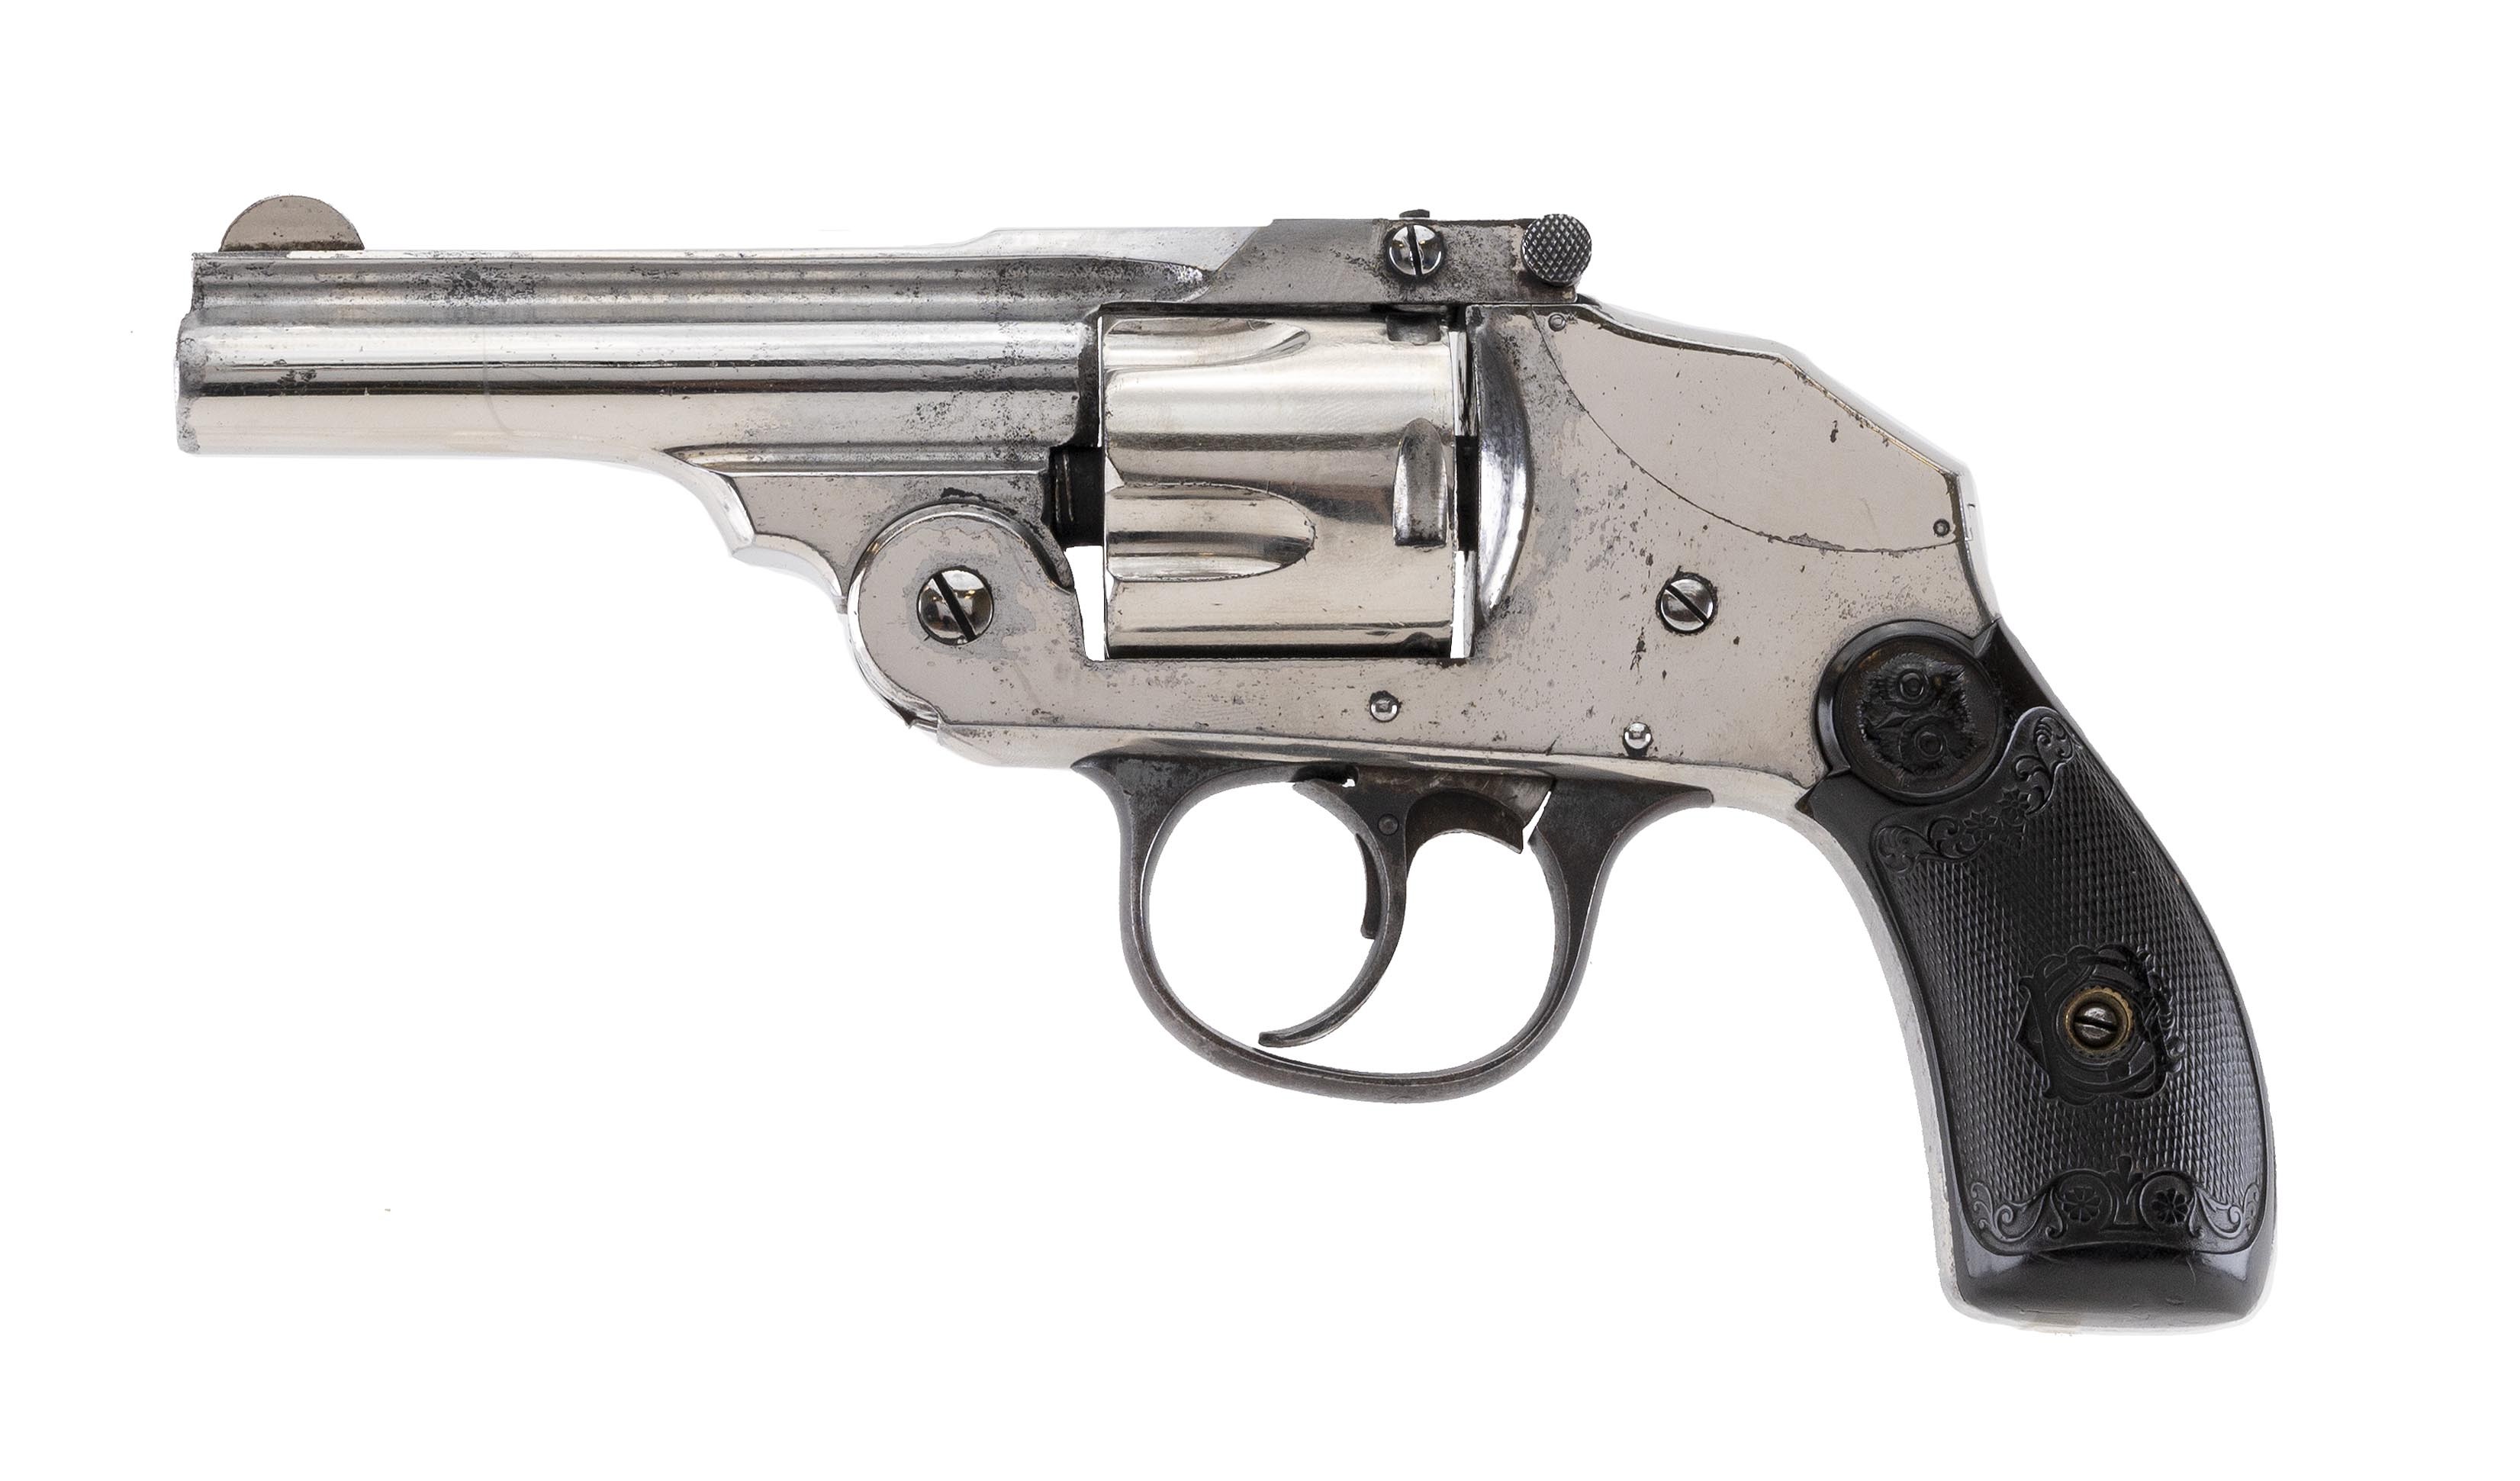 Gun Review: Iver Johnson Safety Automatic Revolver in 32 S&W